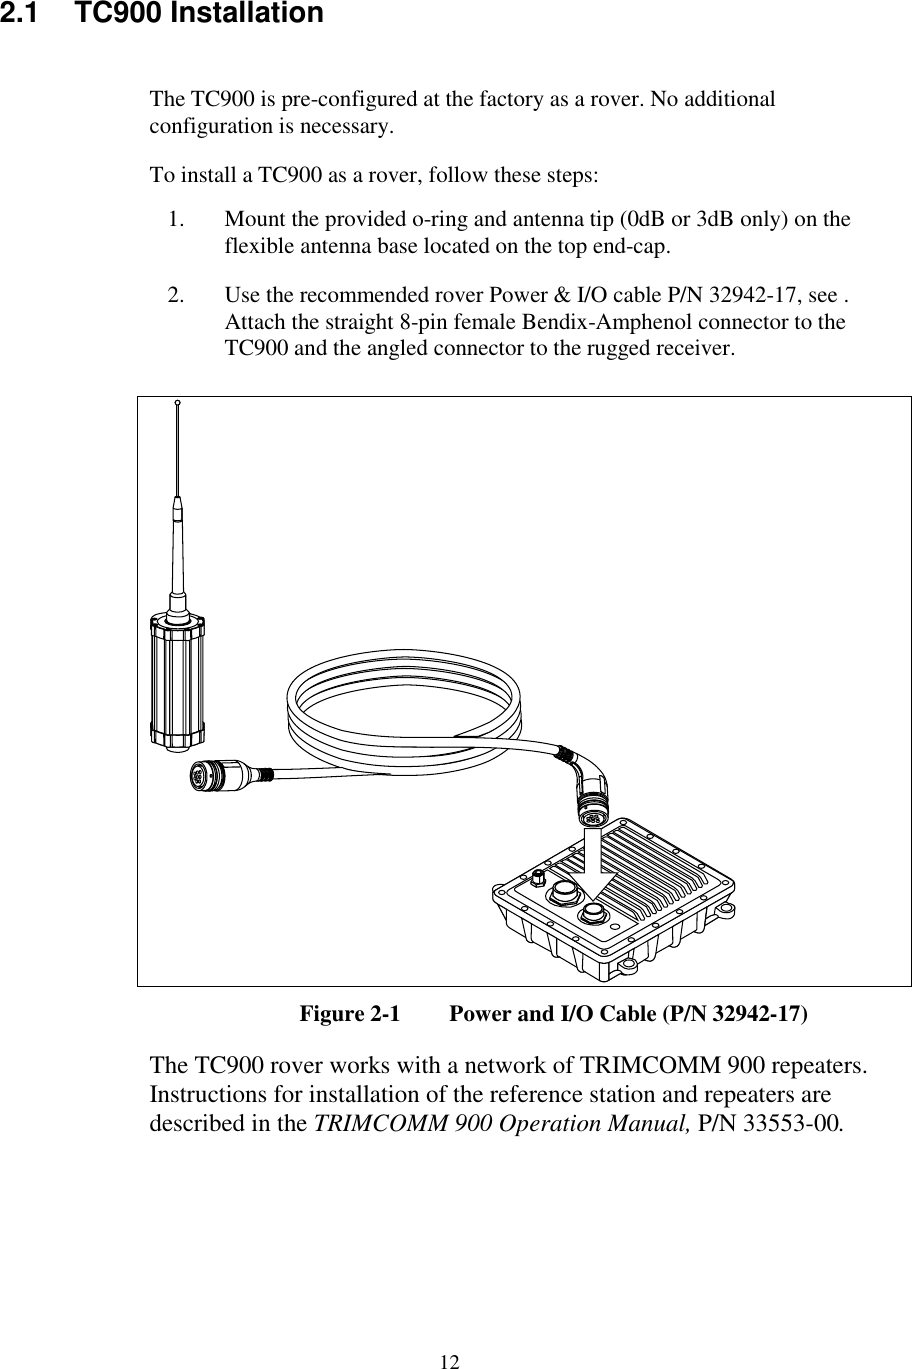 122.1 TC900 InstallationThe TC900 is pre-configured at the factory as a rover. No additionalconfiguration is necessary.To install a TC900 as a rover, follow these steps:1. Mount the provided o-ring and antenna tip (0dB or 3dB only) on theflexible antenna base located on the top end-cap.2. Use the recommended rover Power &amp; I/O cable P/N 32942-17, see .Attach the straight 8-pin female Bendix-Amphenol connector to theTC900 and the angled connector to the rugged receiver.Figure 2-1 Power and I/O Cable (P/N 32942-17)The TC900 rover works with a network of TRIMCOMM 900 repeaters.Instructions for installation of the reference station and repeaters aredescribed in the TRIMCOMM 900 Operation Manual, P/N 33553-00.